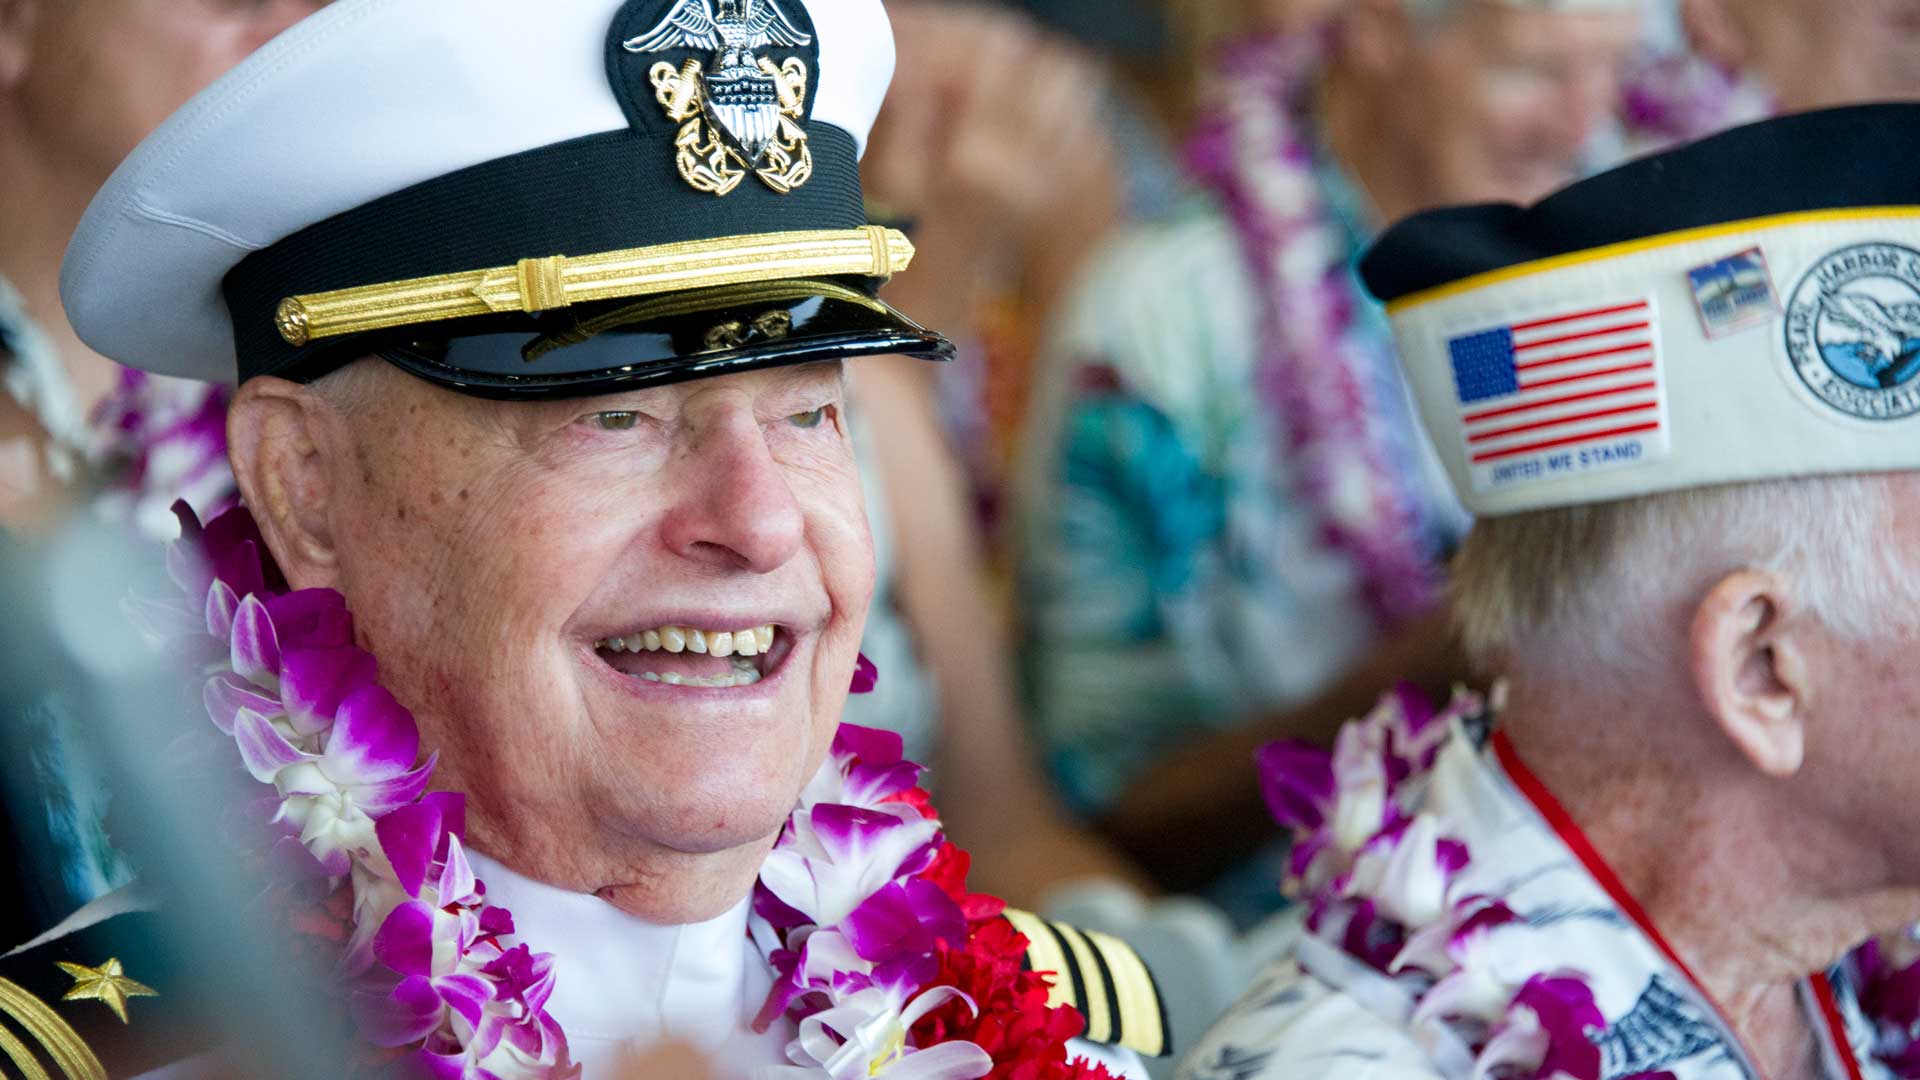 Lou Conter, an Arizona crewman, attends ceremonies for the 75th anniversary of the Japanese attack on Pearl Harbor, Dec. 7, 2016, in Honolulu. Conter, the last living survivor of the USS Arizona battleship that exploded and sank during the Japanese bombing of Pearl Harbor, died on Monday, April 1, 2024, following congestive heart failure, his daughter said. He was 102. 